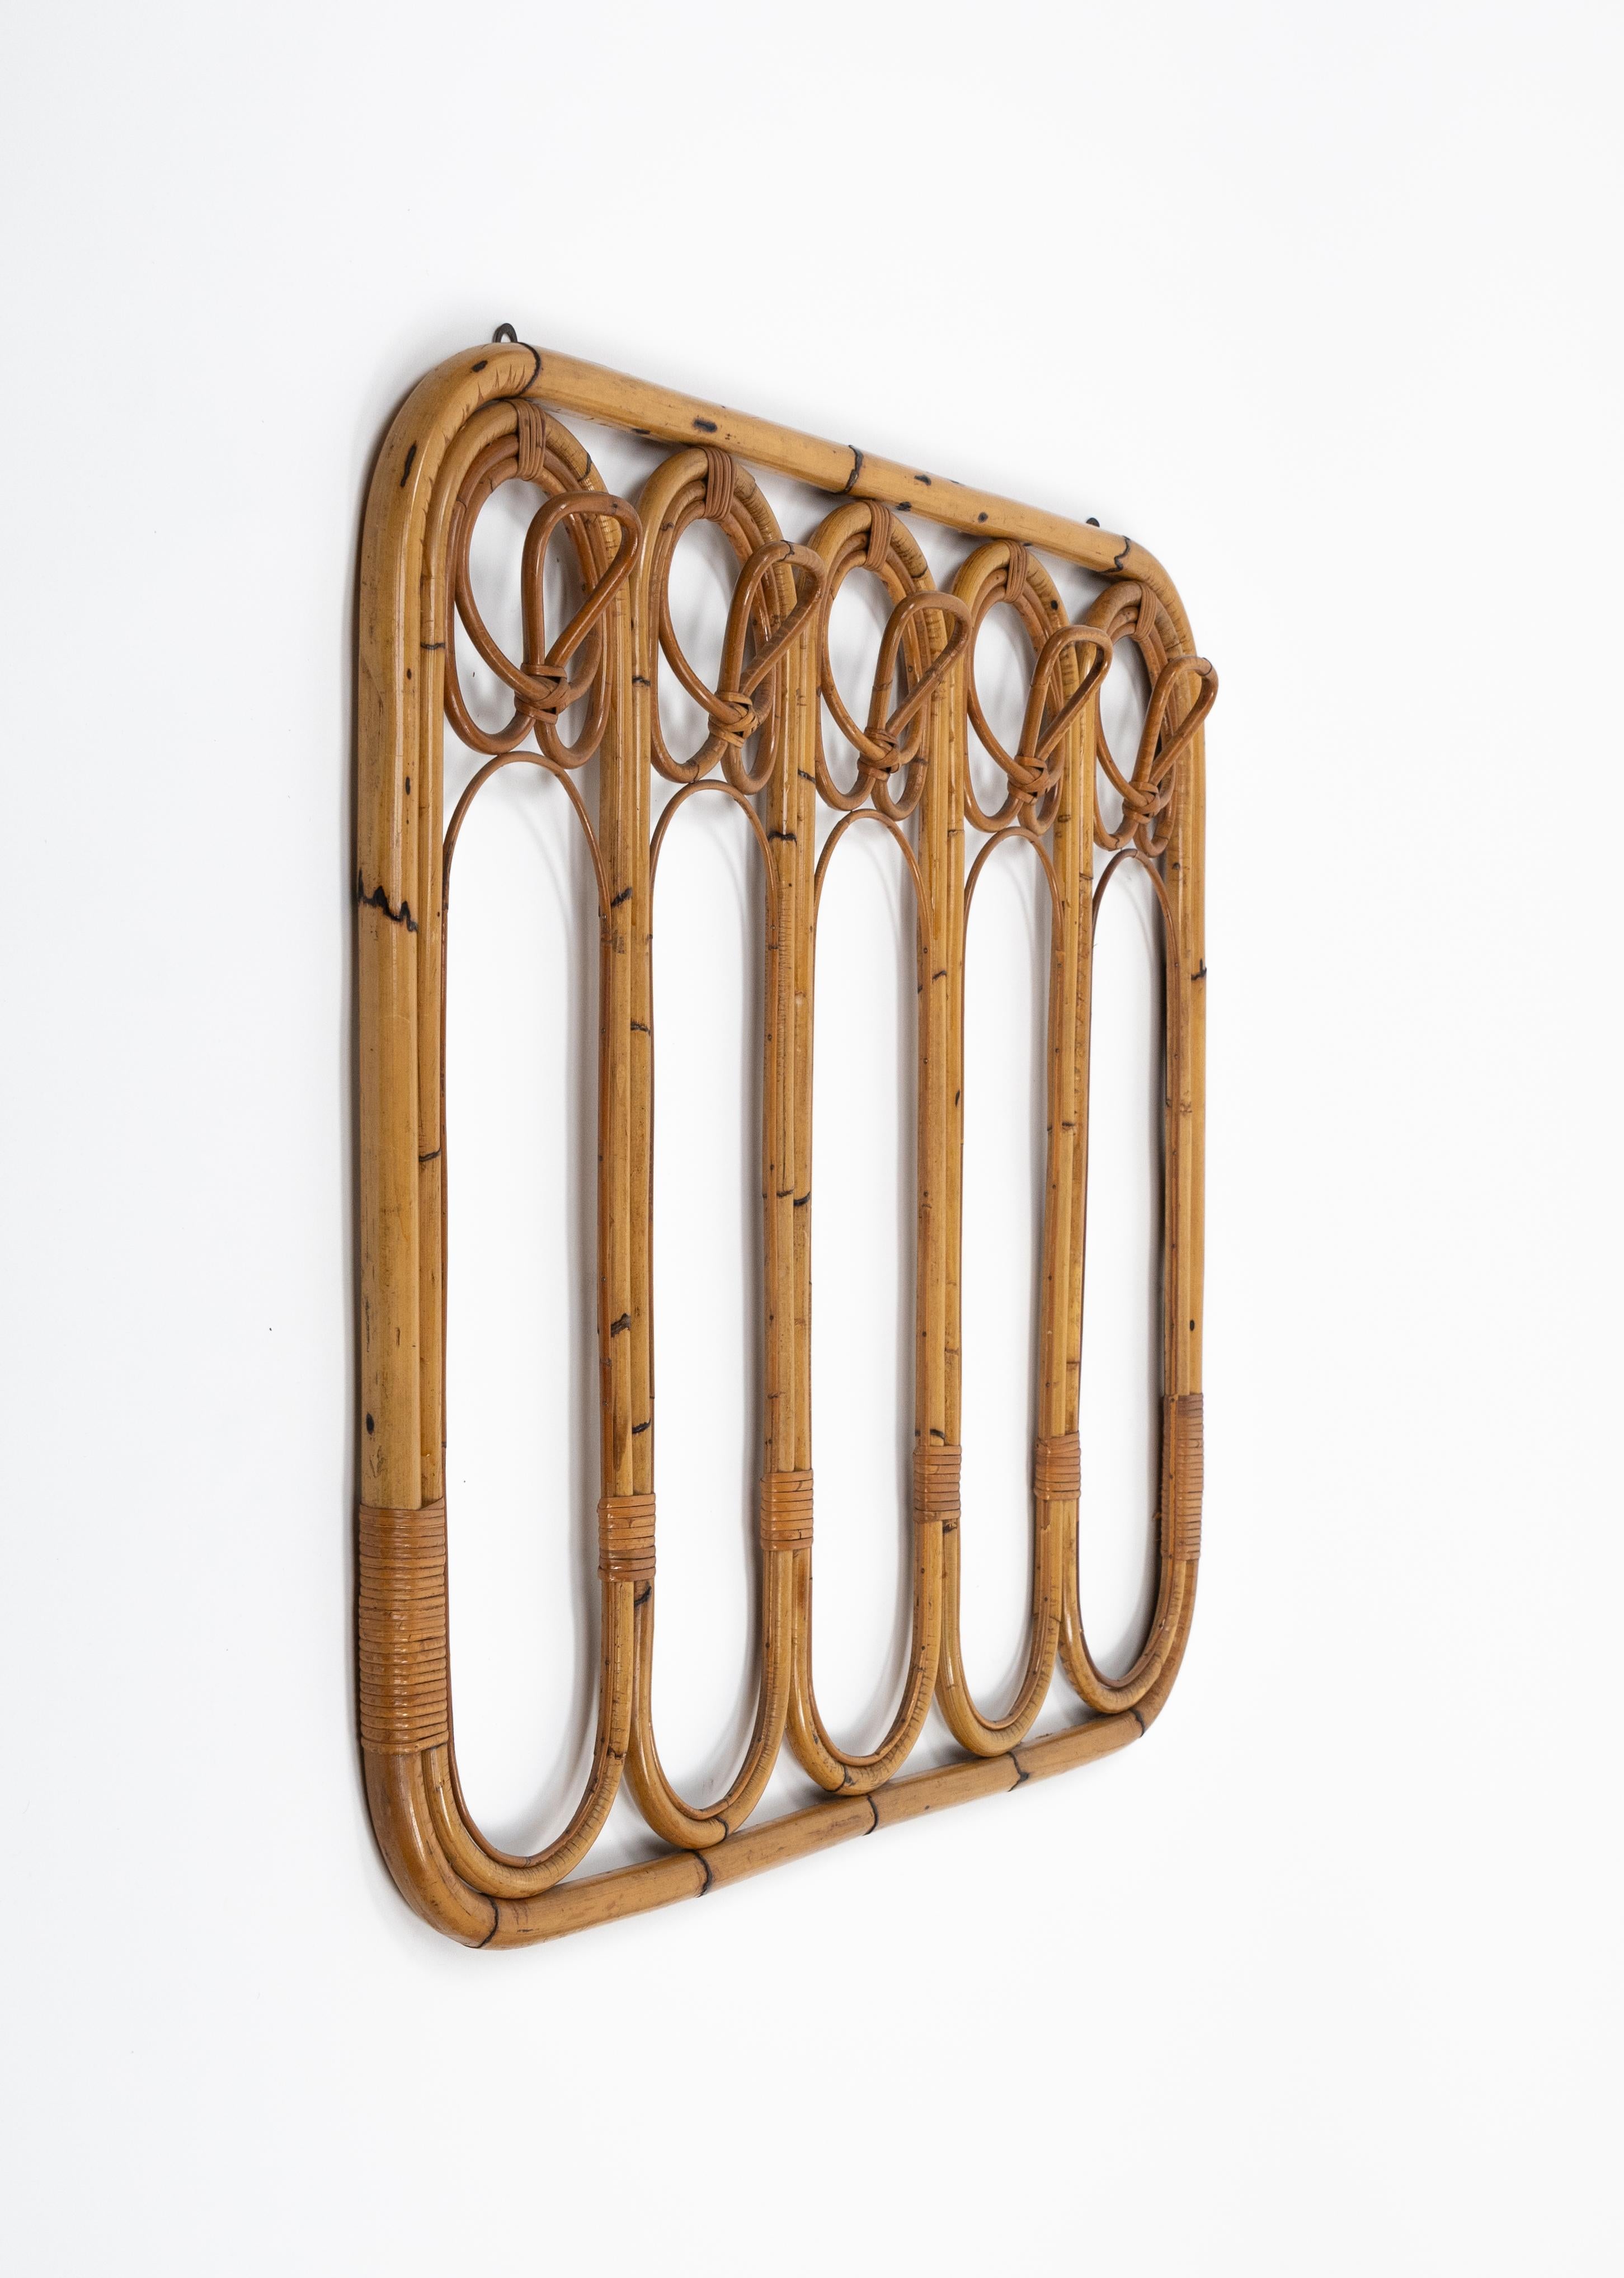 Midcentury amazing big rectangular coat hanger with rounded corners in bamboo and rattan featuring five hooks.  

Made in Italy in the 1960s.